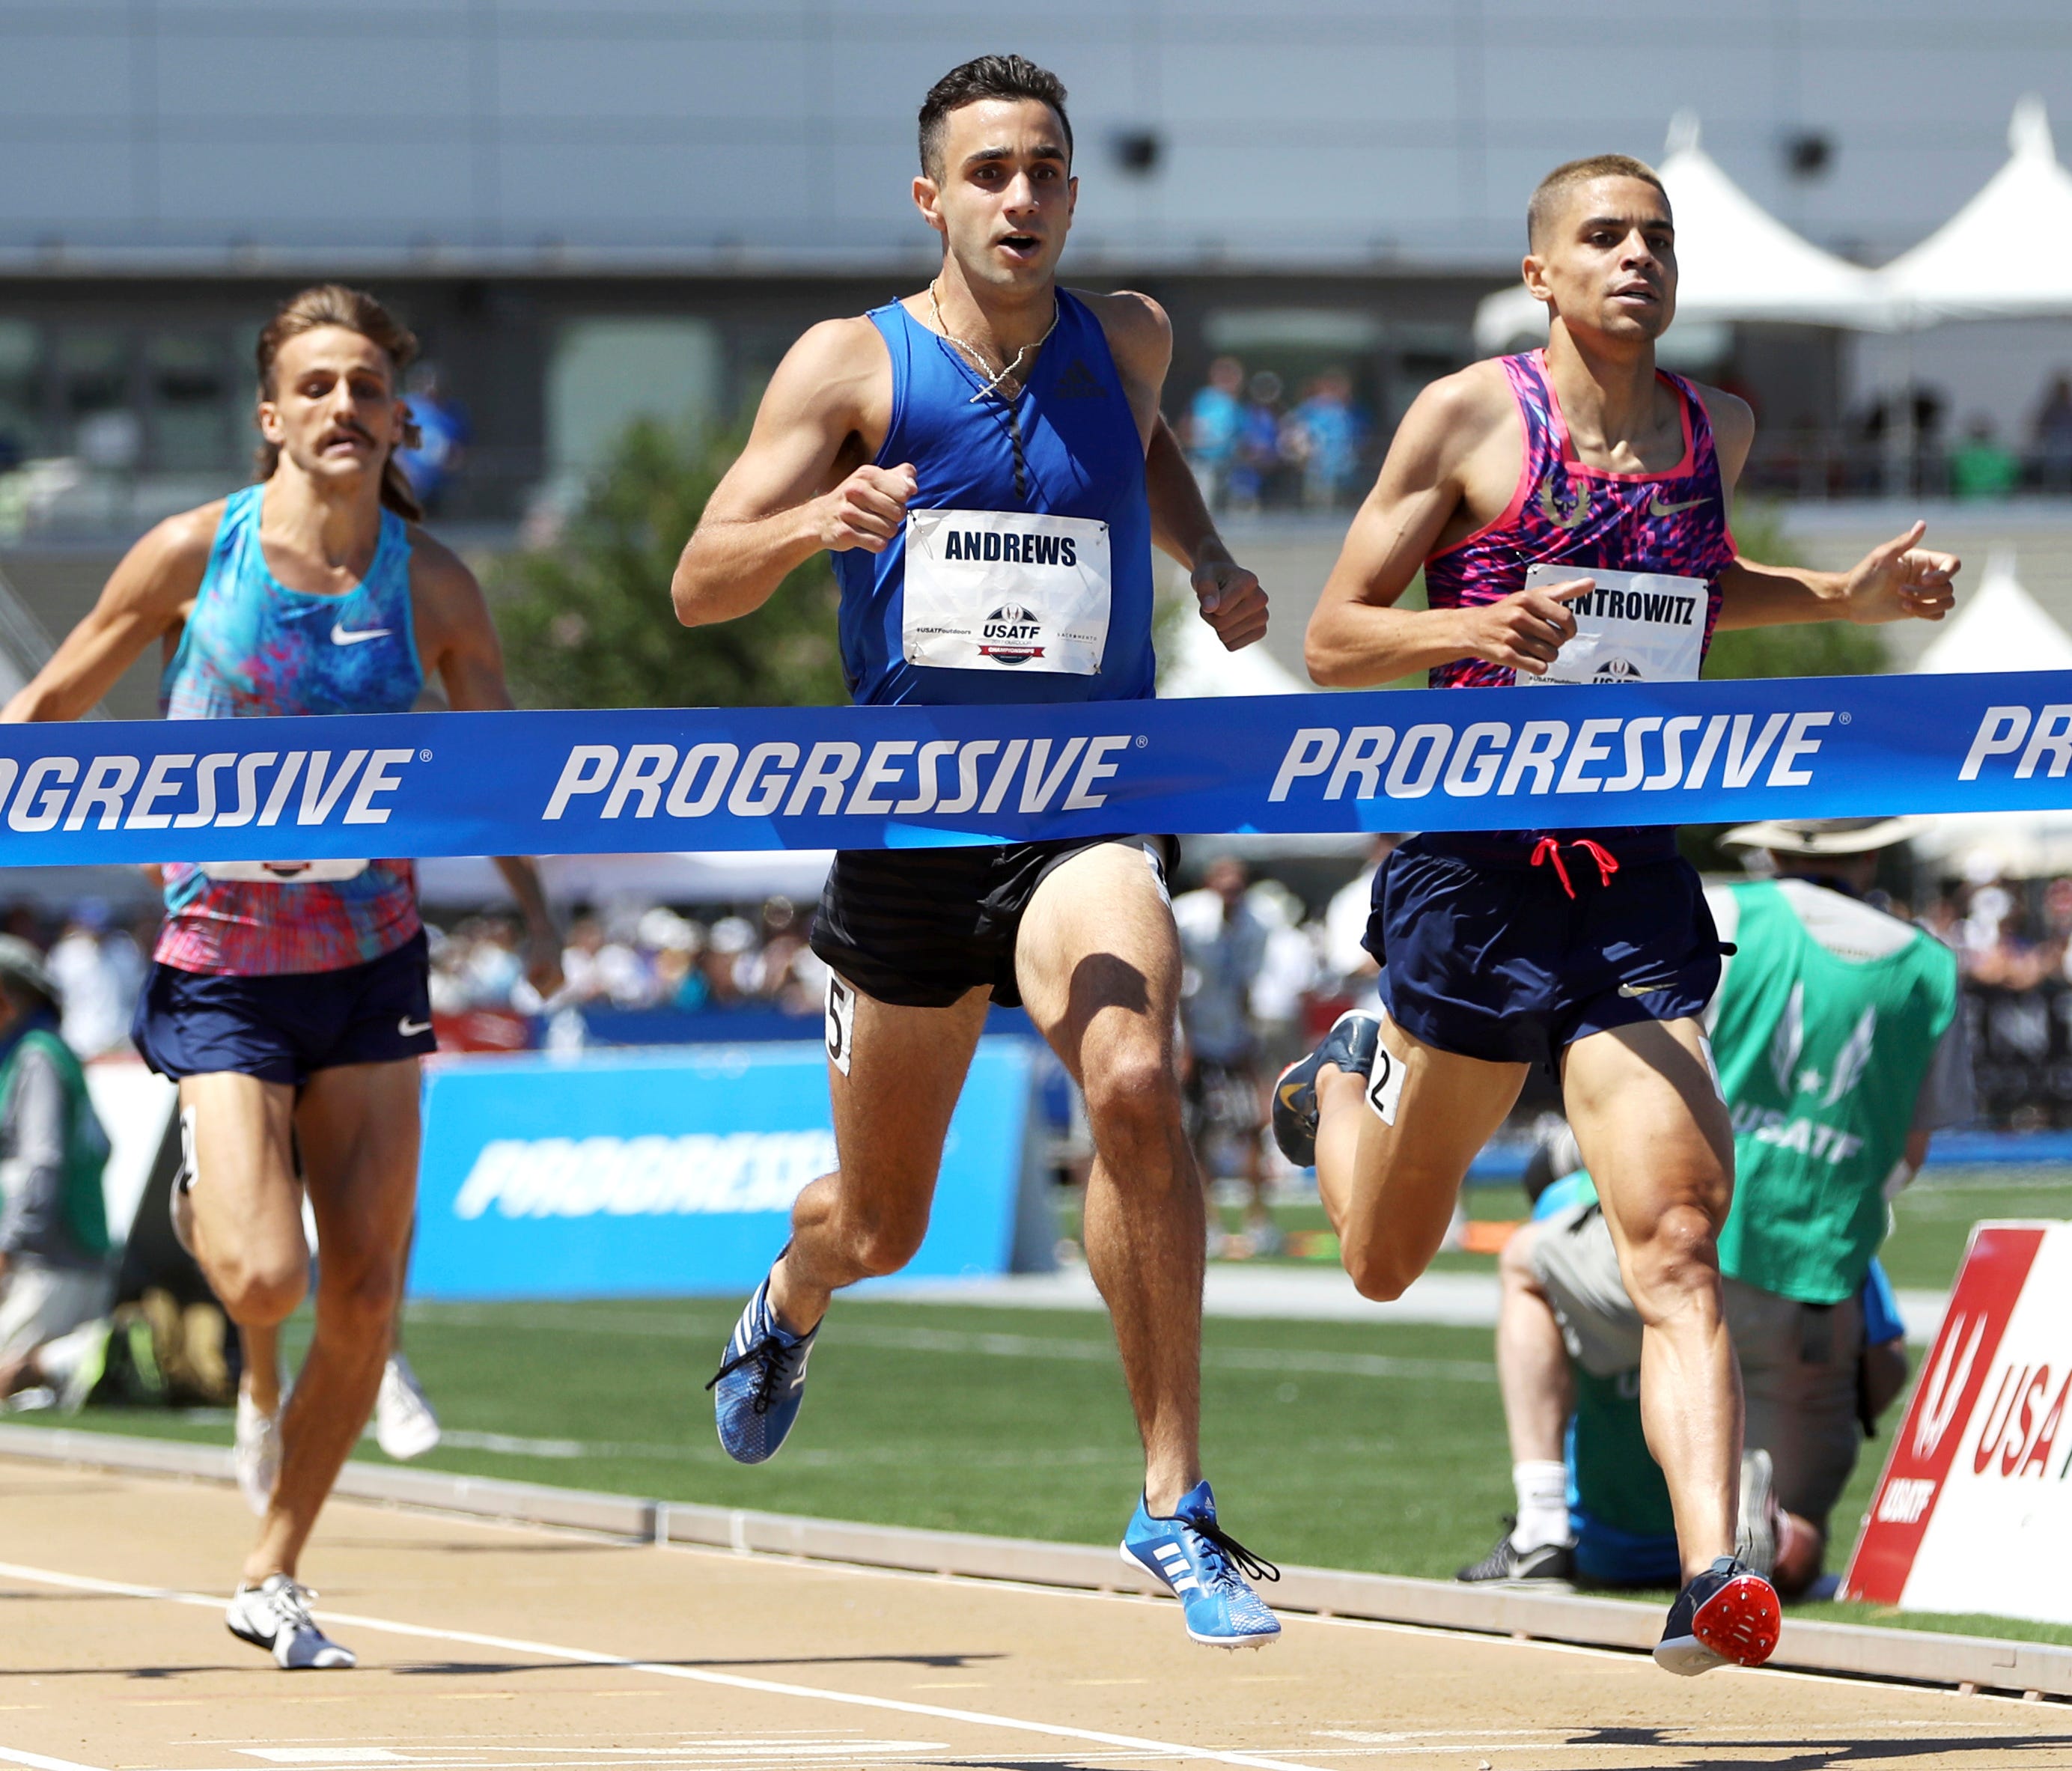 Robby Andrews, second from right, wins the men's 1500 meters ahead of second-place finisher Matthew Centrowitz.